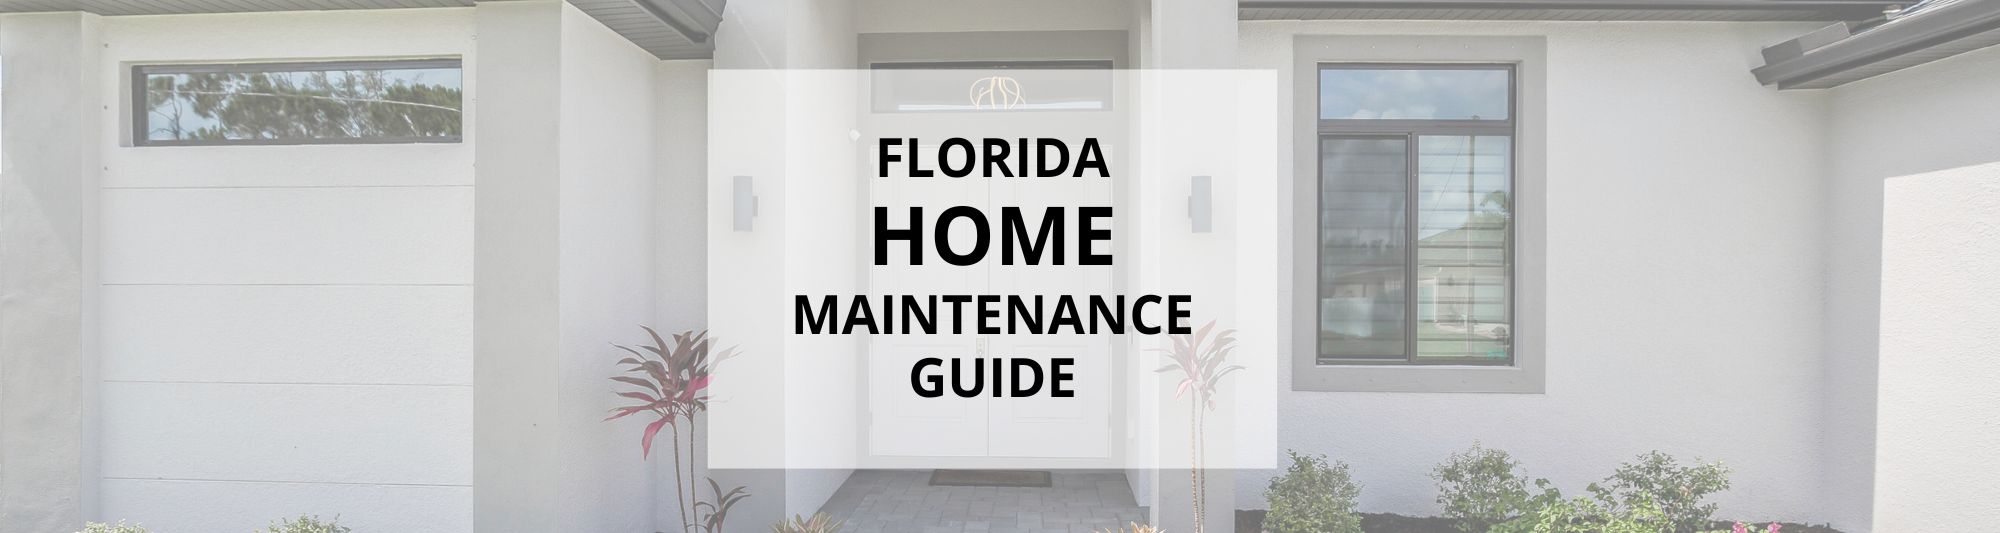 Photo of a home with text about Florida Home Maintenance Guide